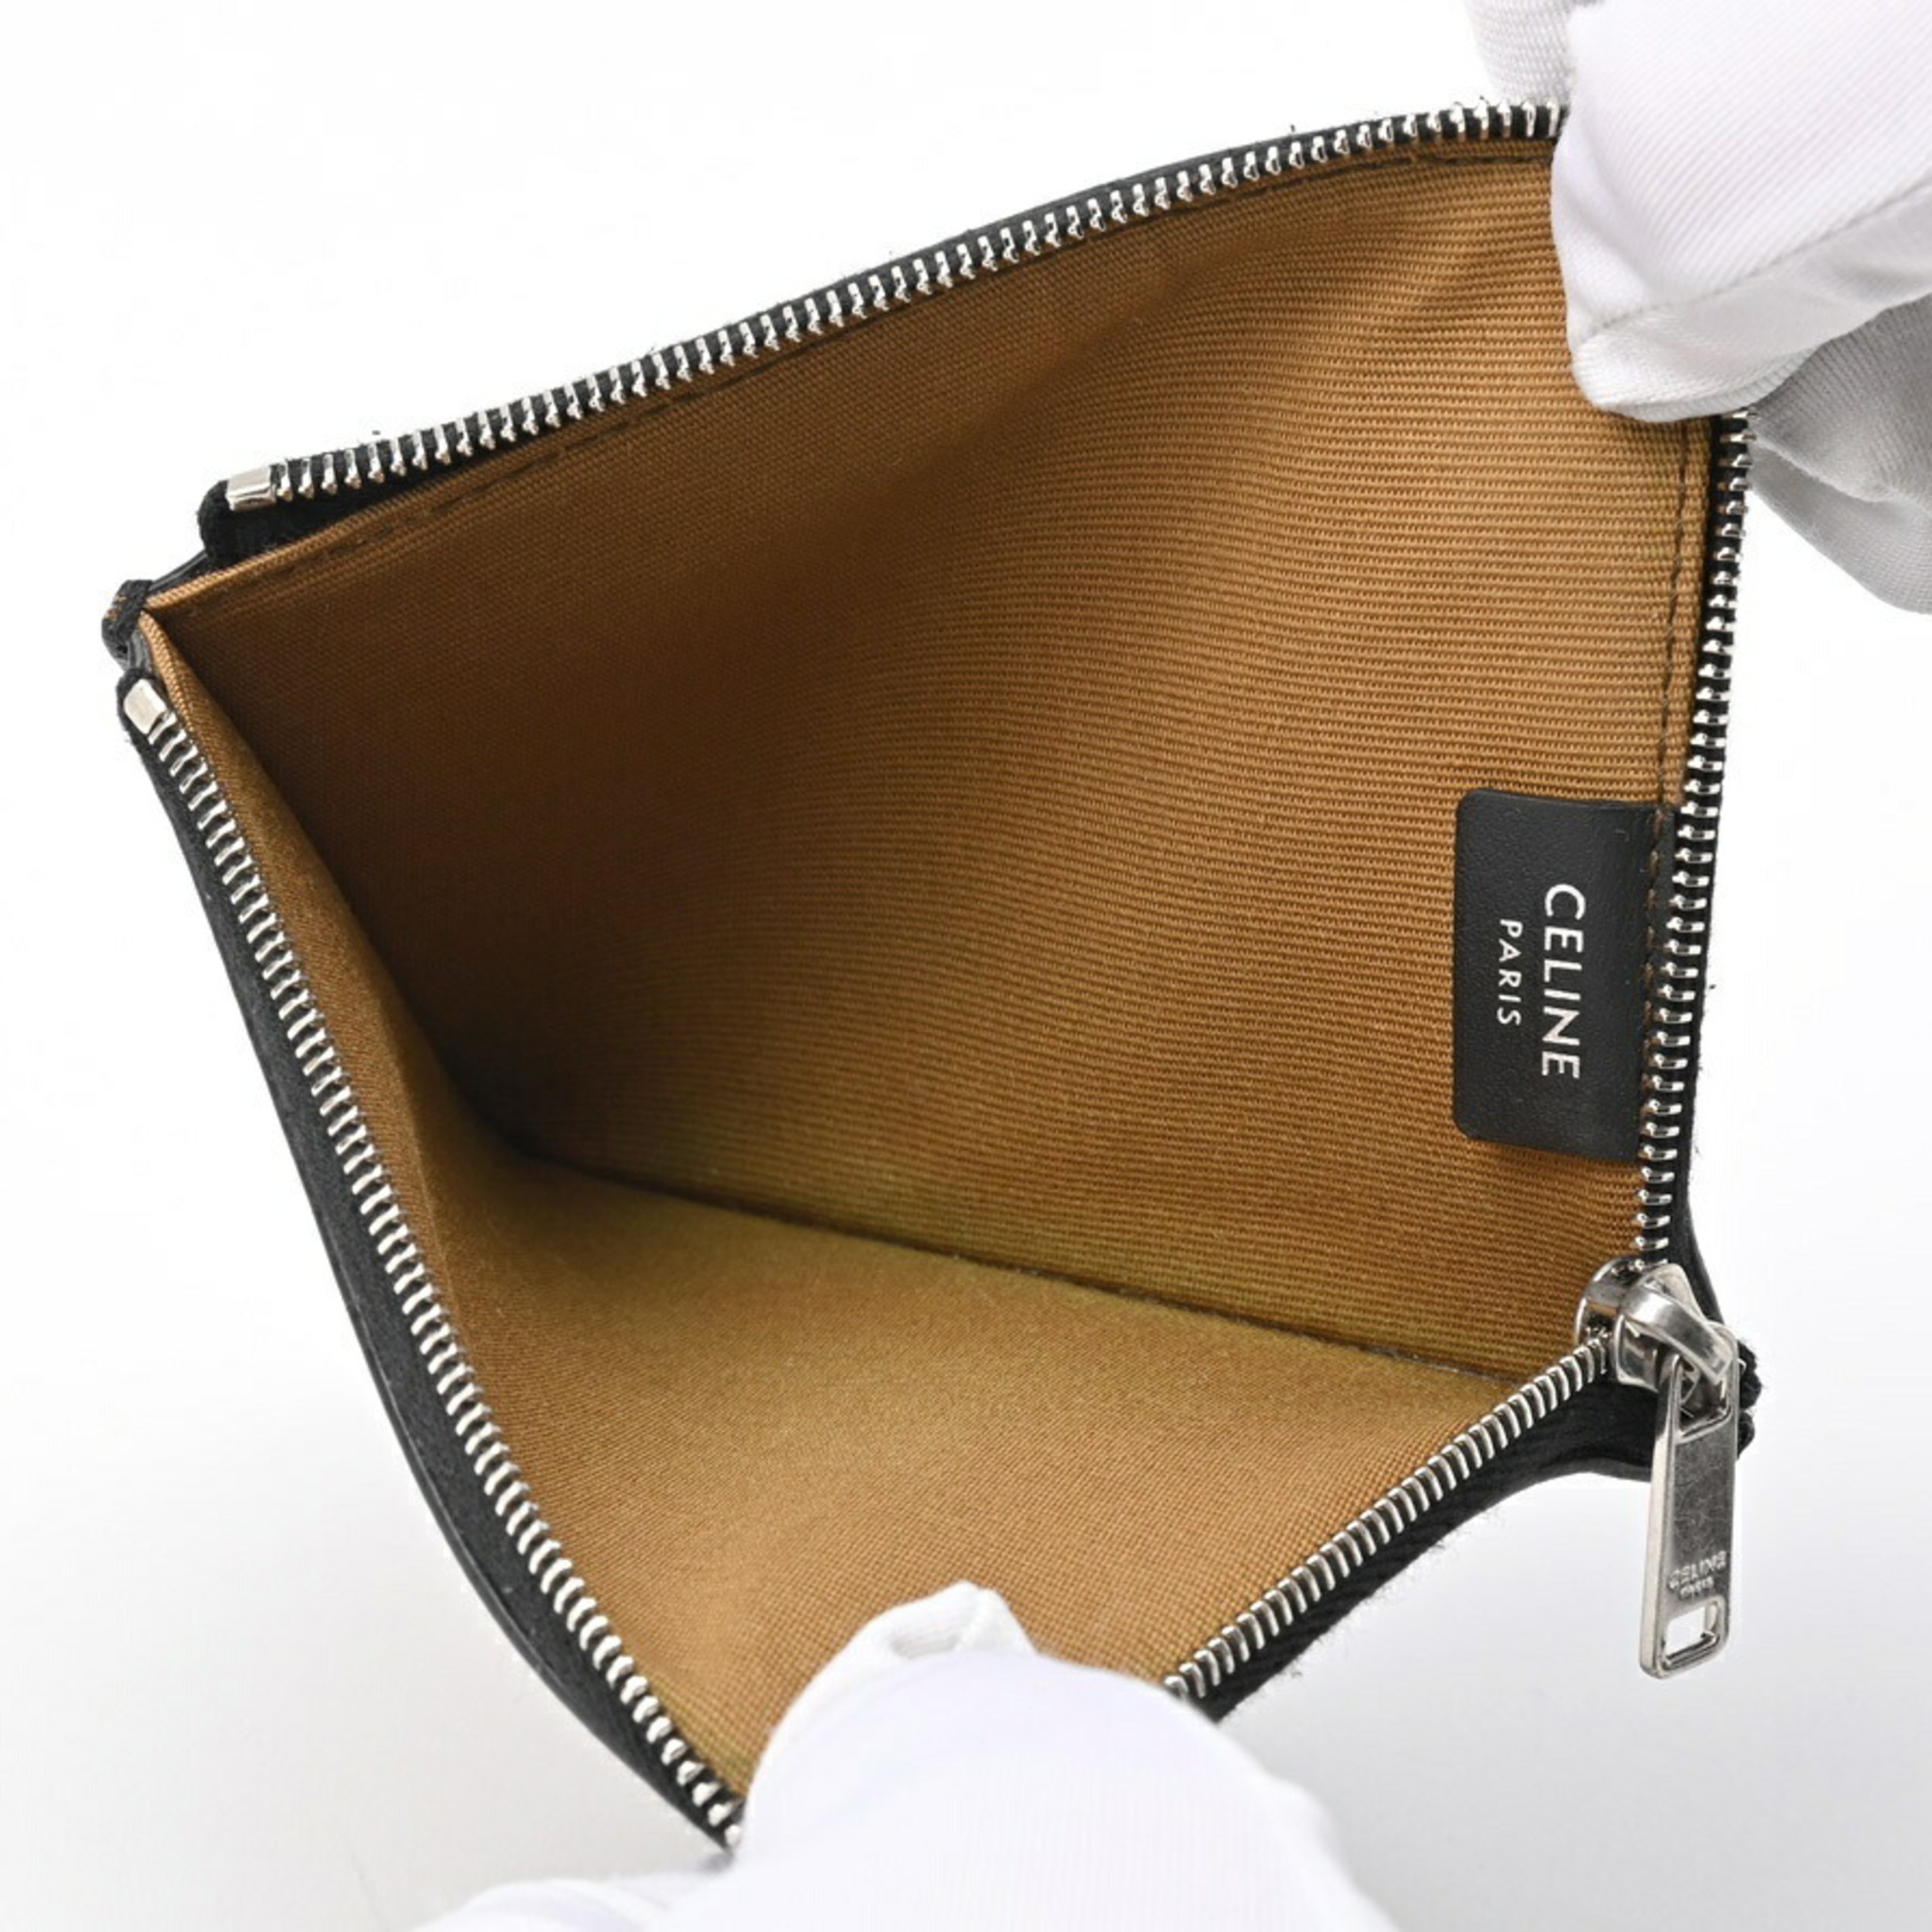 CELINE L-shaped coin purse with card holder 10D882EIX.38SI Triomphe canvas lambskin T-155508